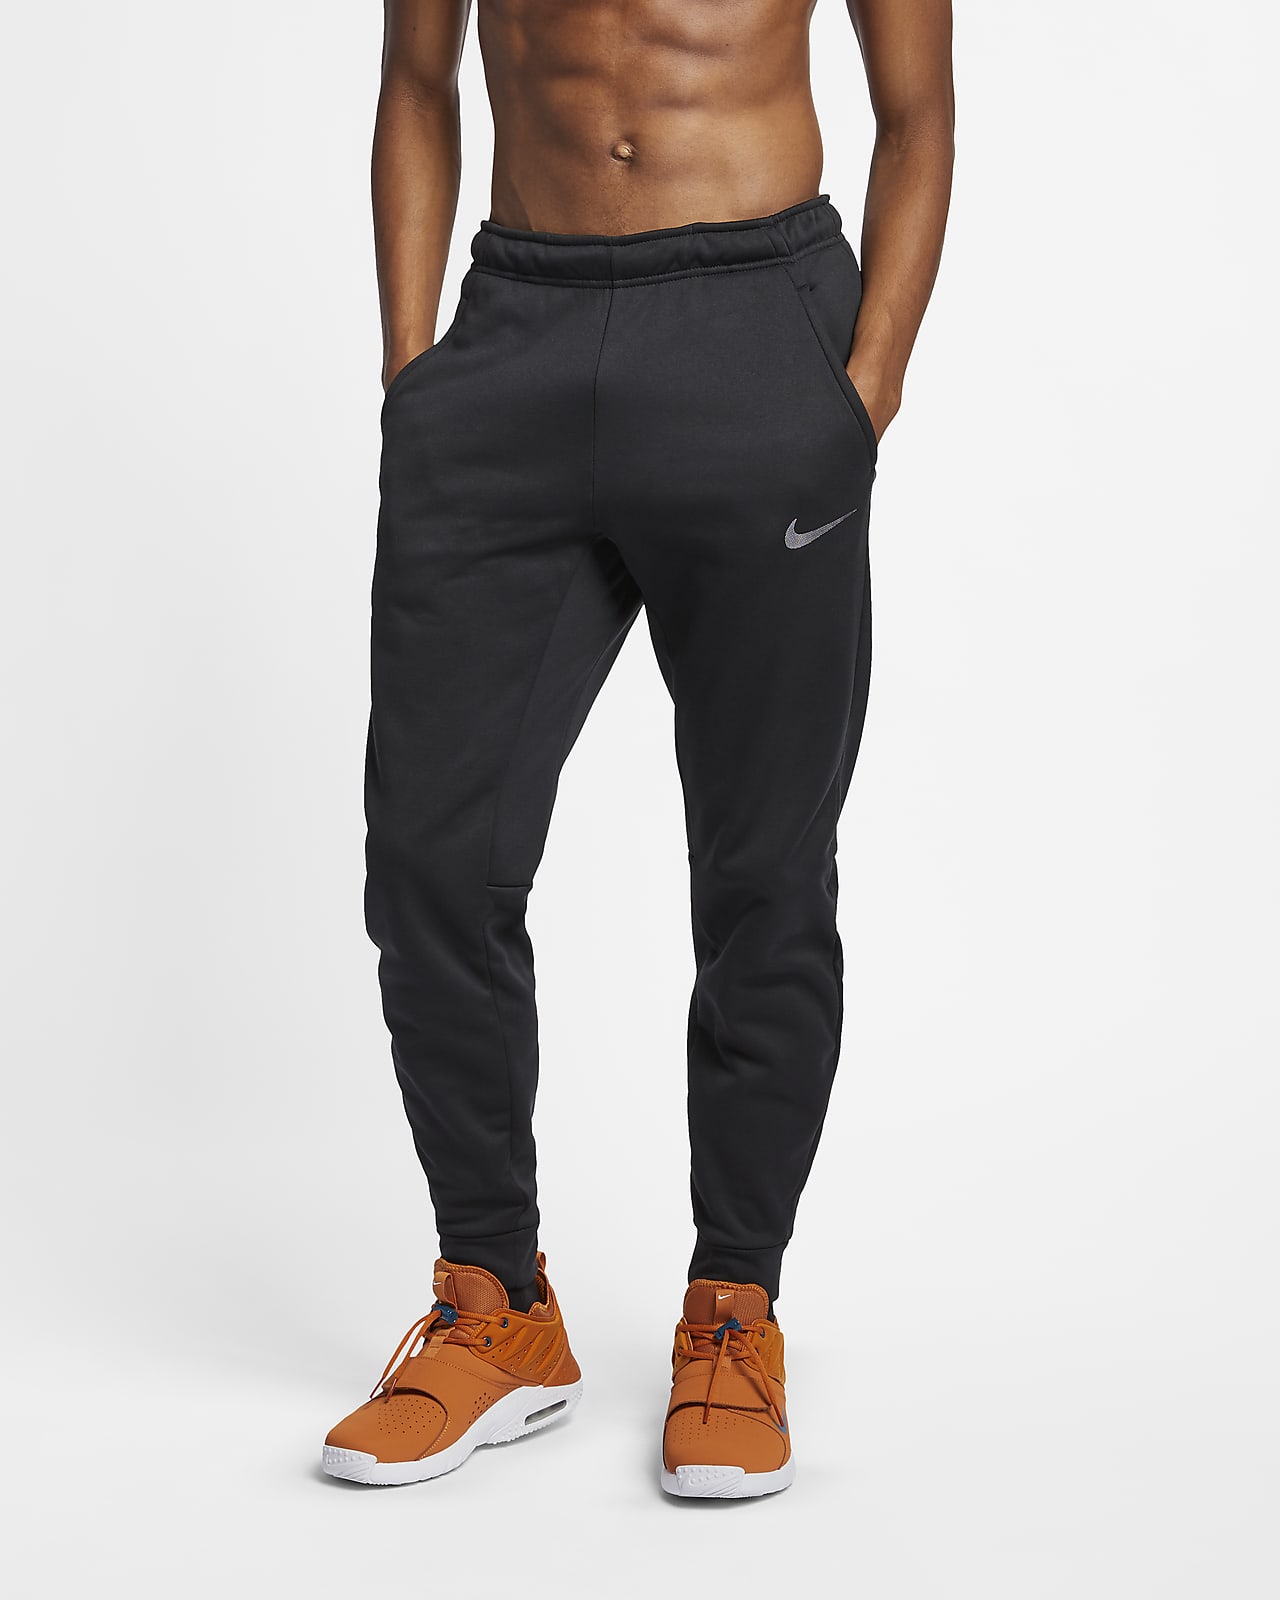 Lovely See you tomorrow Cyclops Nike Therma-FIT Men's Tapered Training Trousers. Nike LU